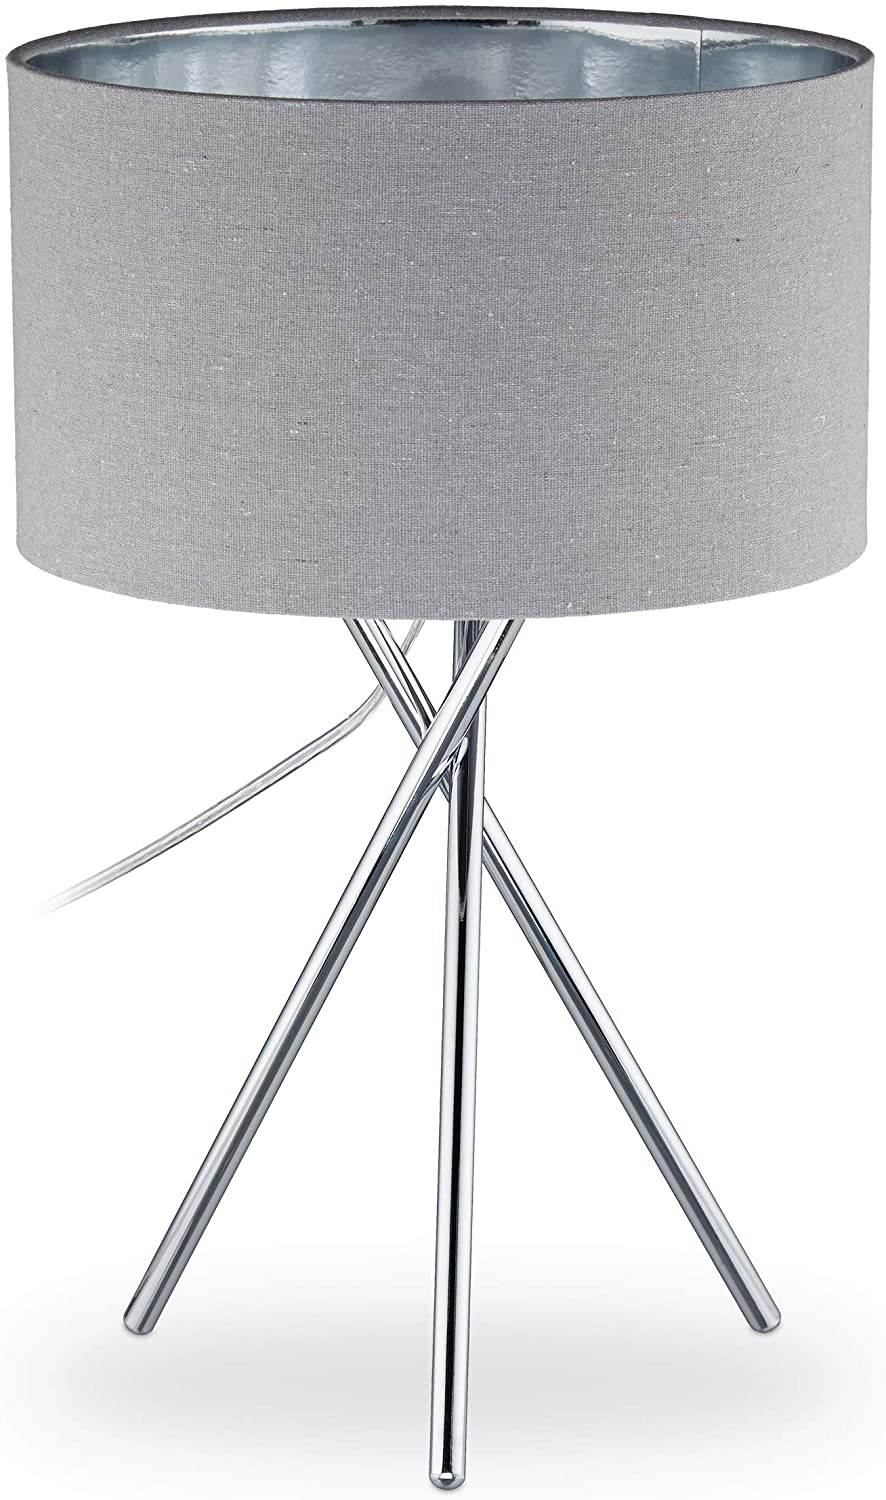 Relaxdays Tripod Lamp Decorative Lamp With Switch